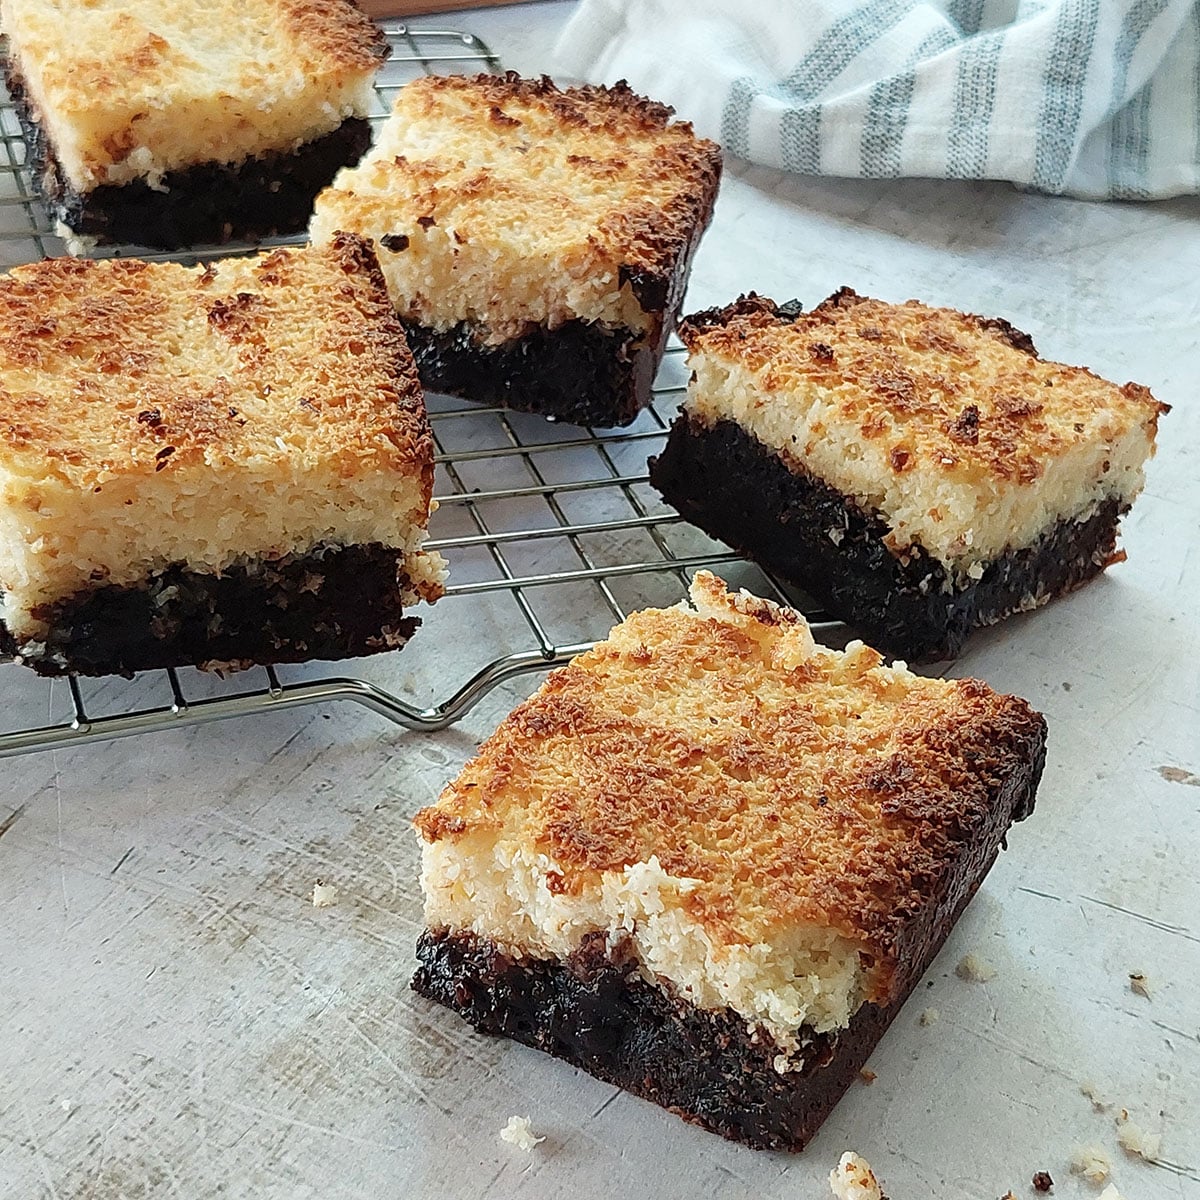 Rich fudgy chocolate brownies baked with crisp chewy coconut topping - now that's what I call pure decadence!